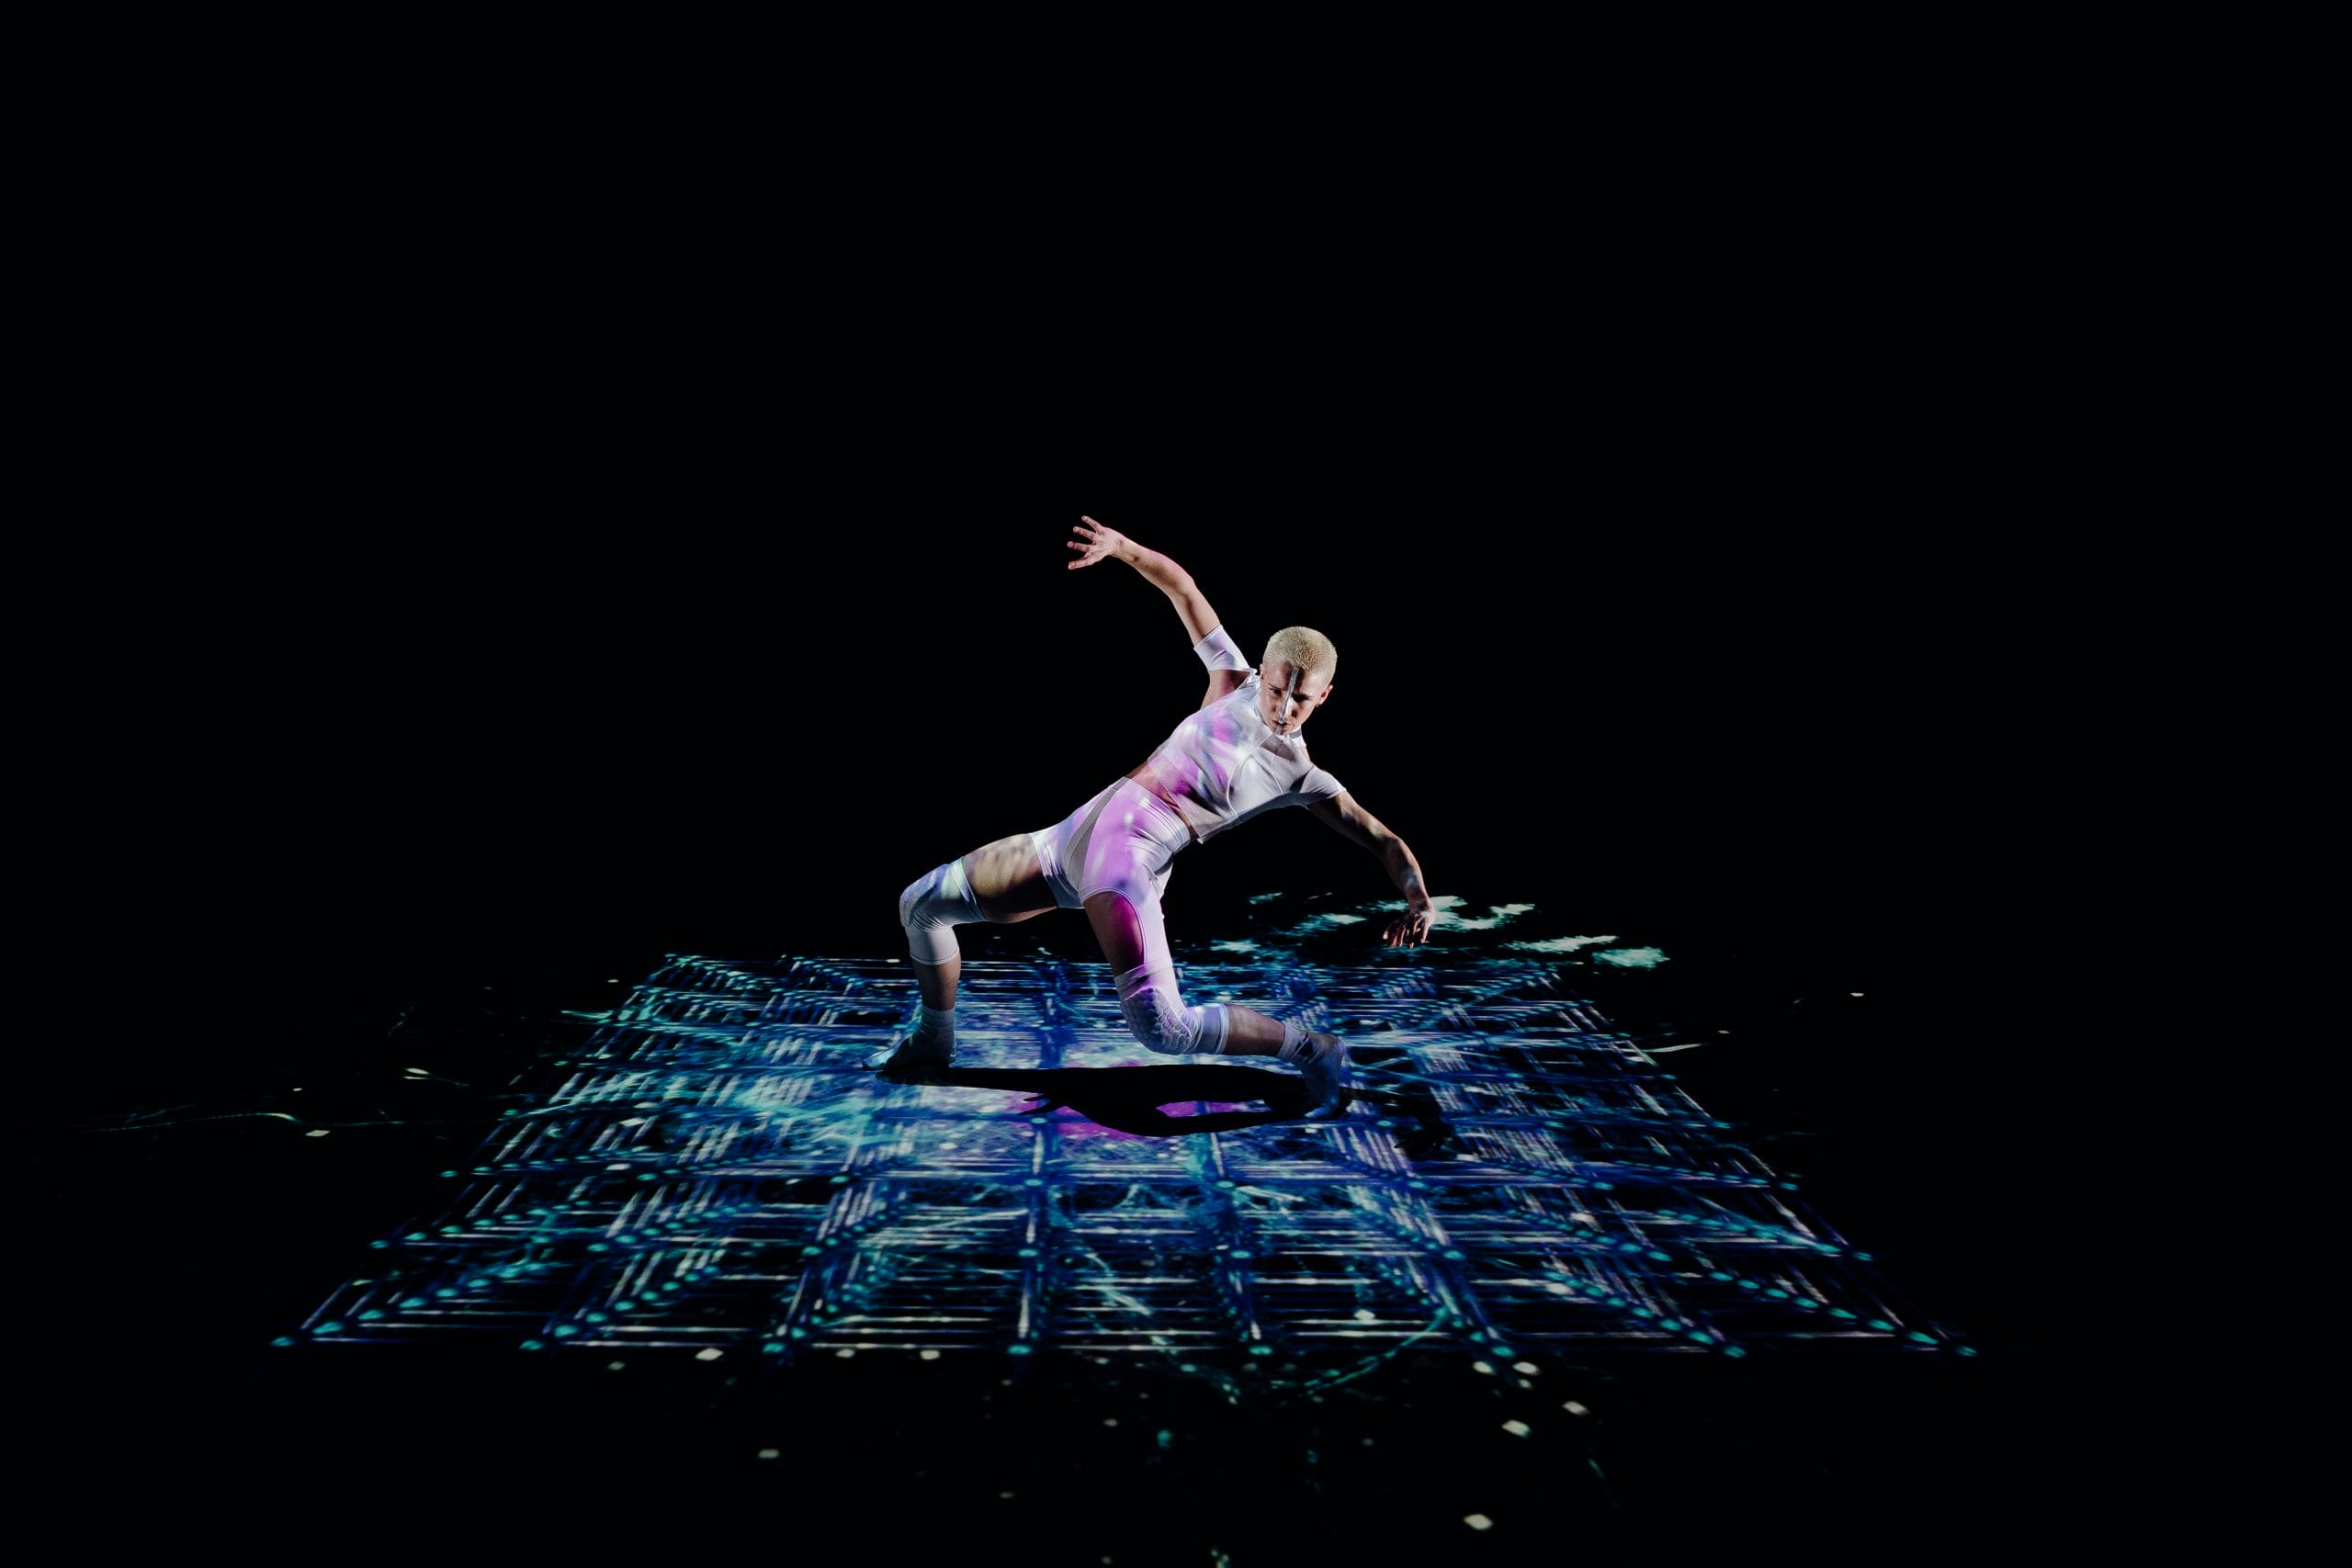 A dancer on stage surrounded by light projections